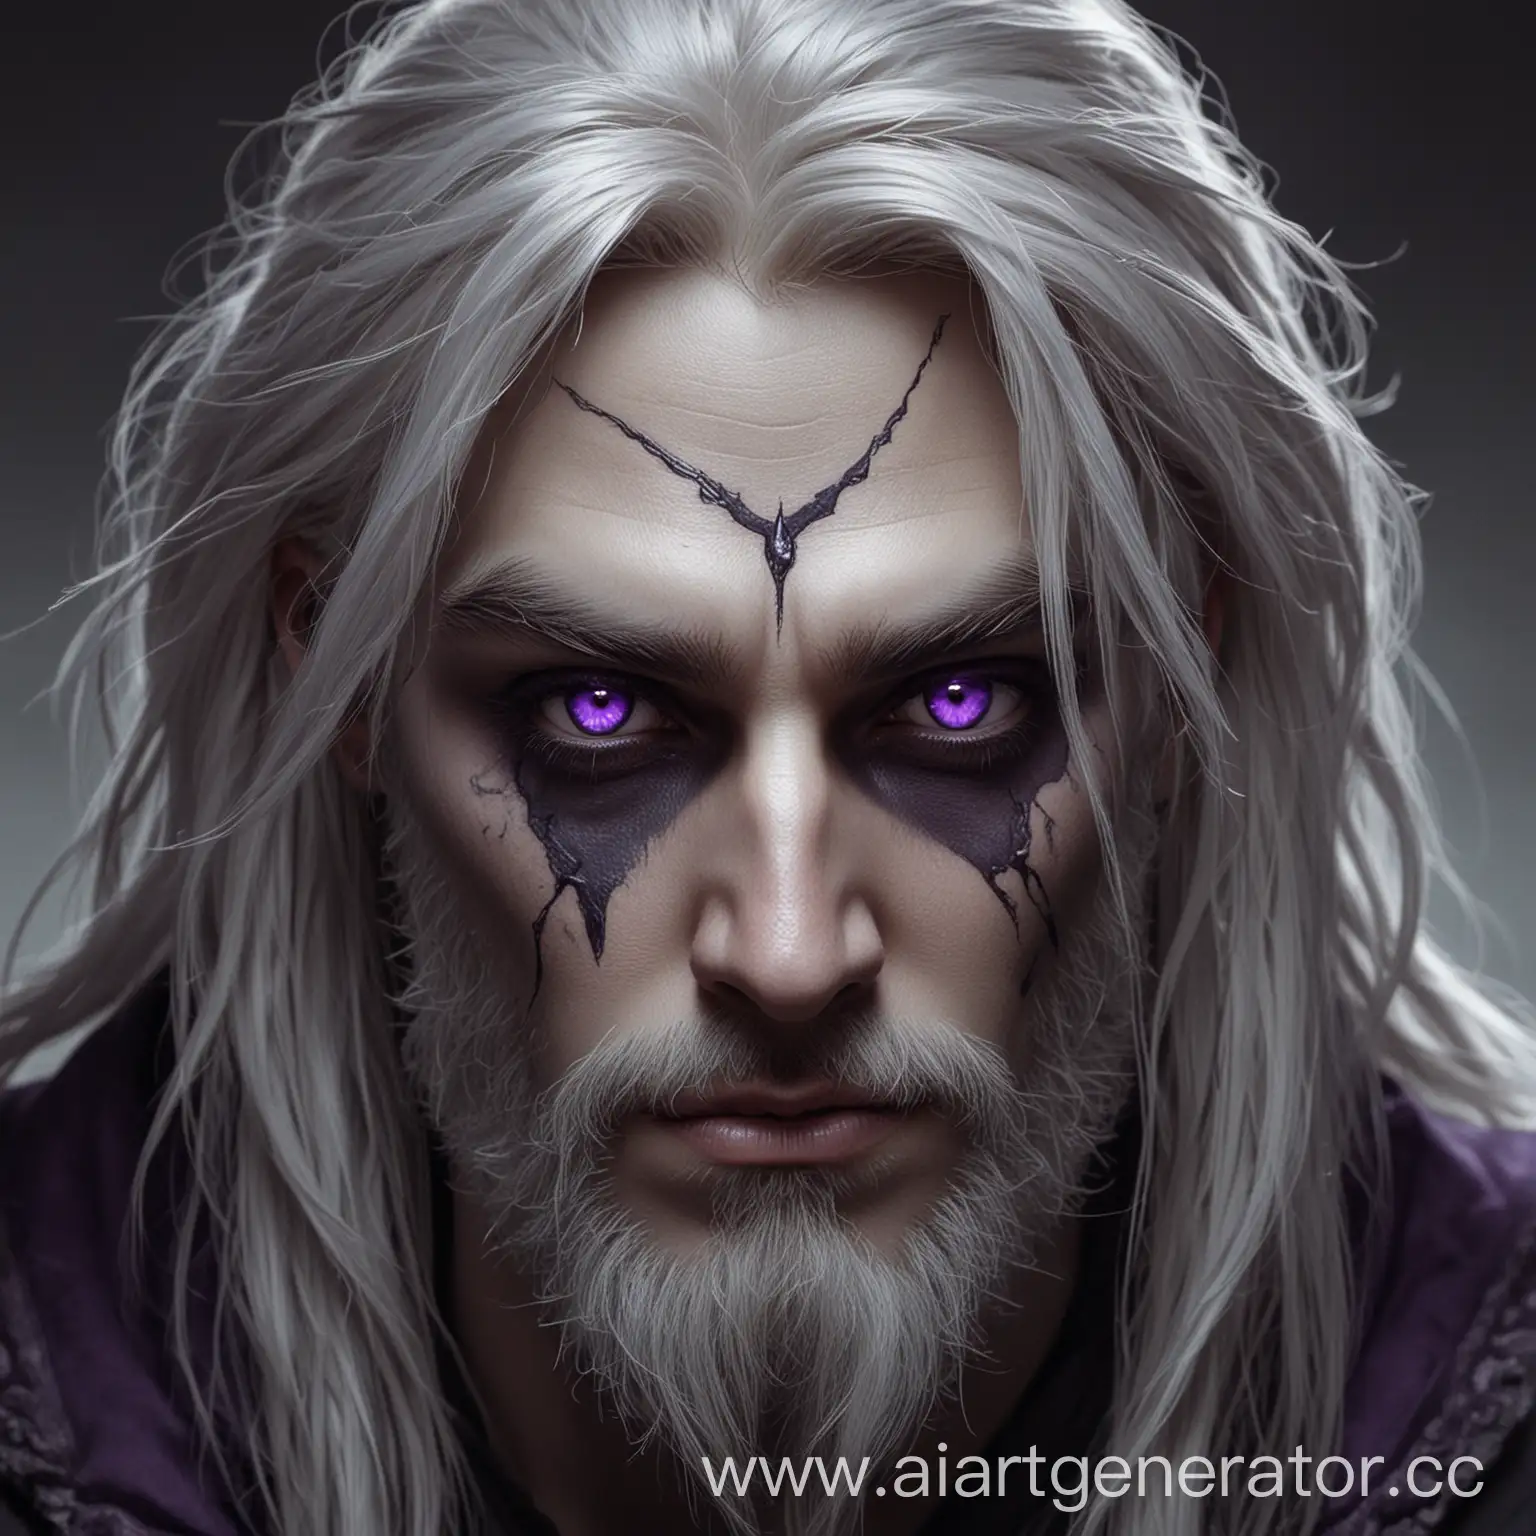 Drow-Elf-with-Purple-Eyes-and-Scars-Fantasy-Character-Portrait